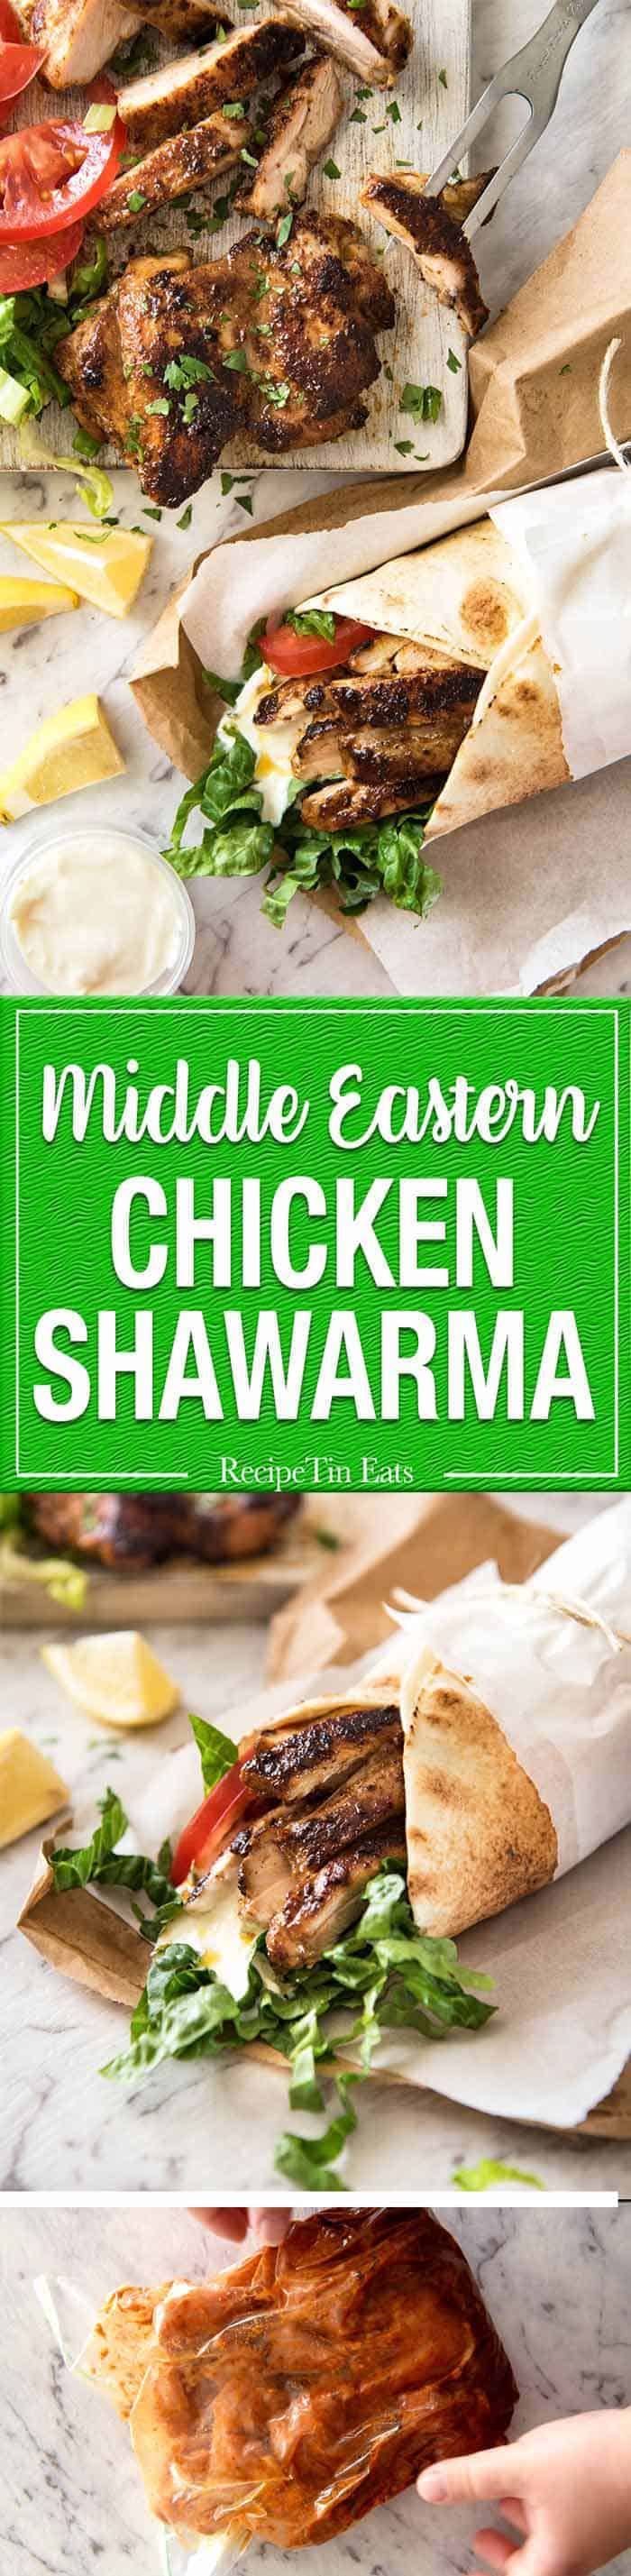 The flavour of this Chicken Shawarma marinade is absolutely incredible, yet made with just a handful of everyday spices. recipetineats.com